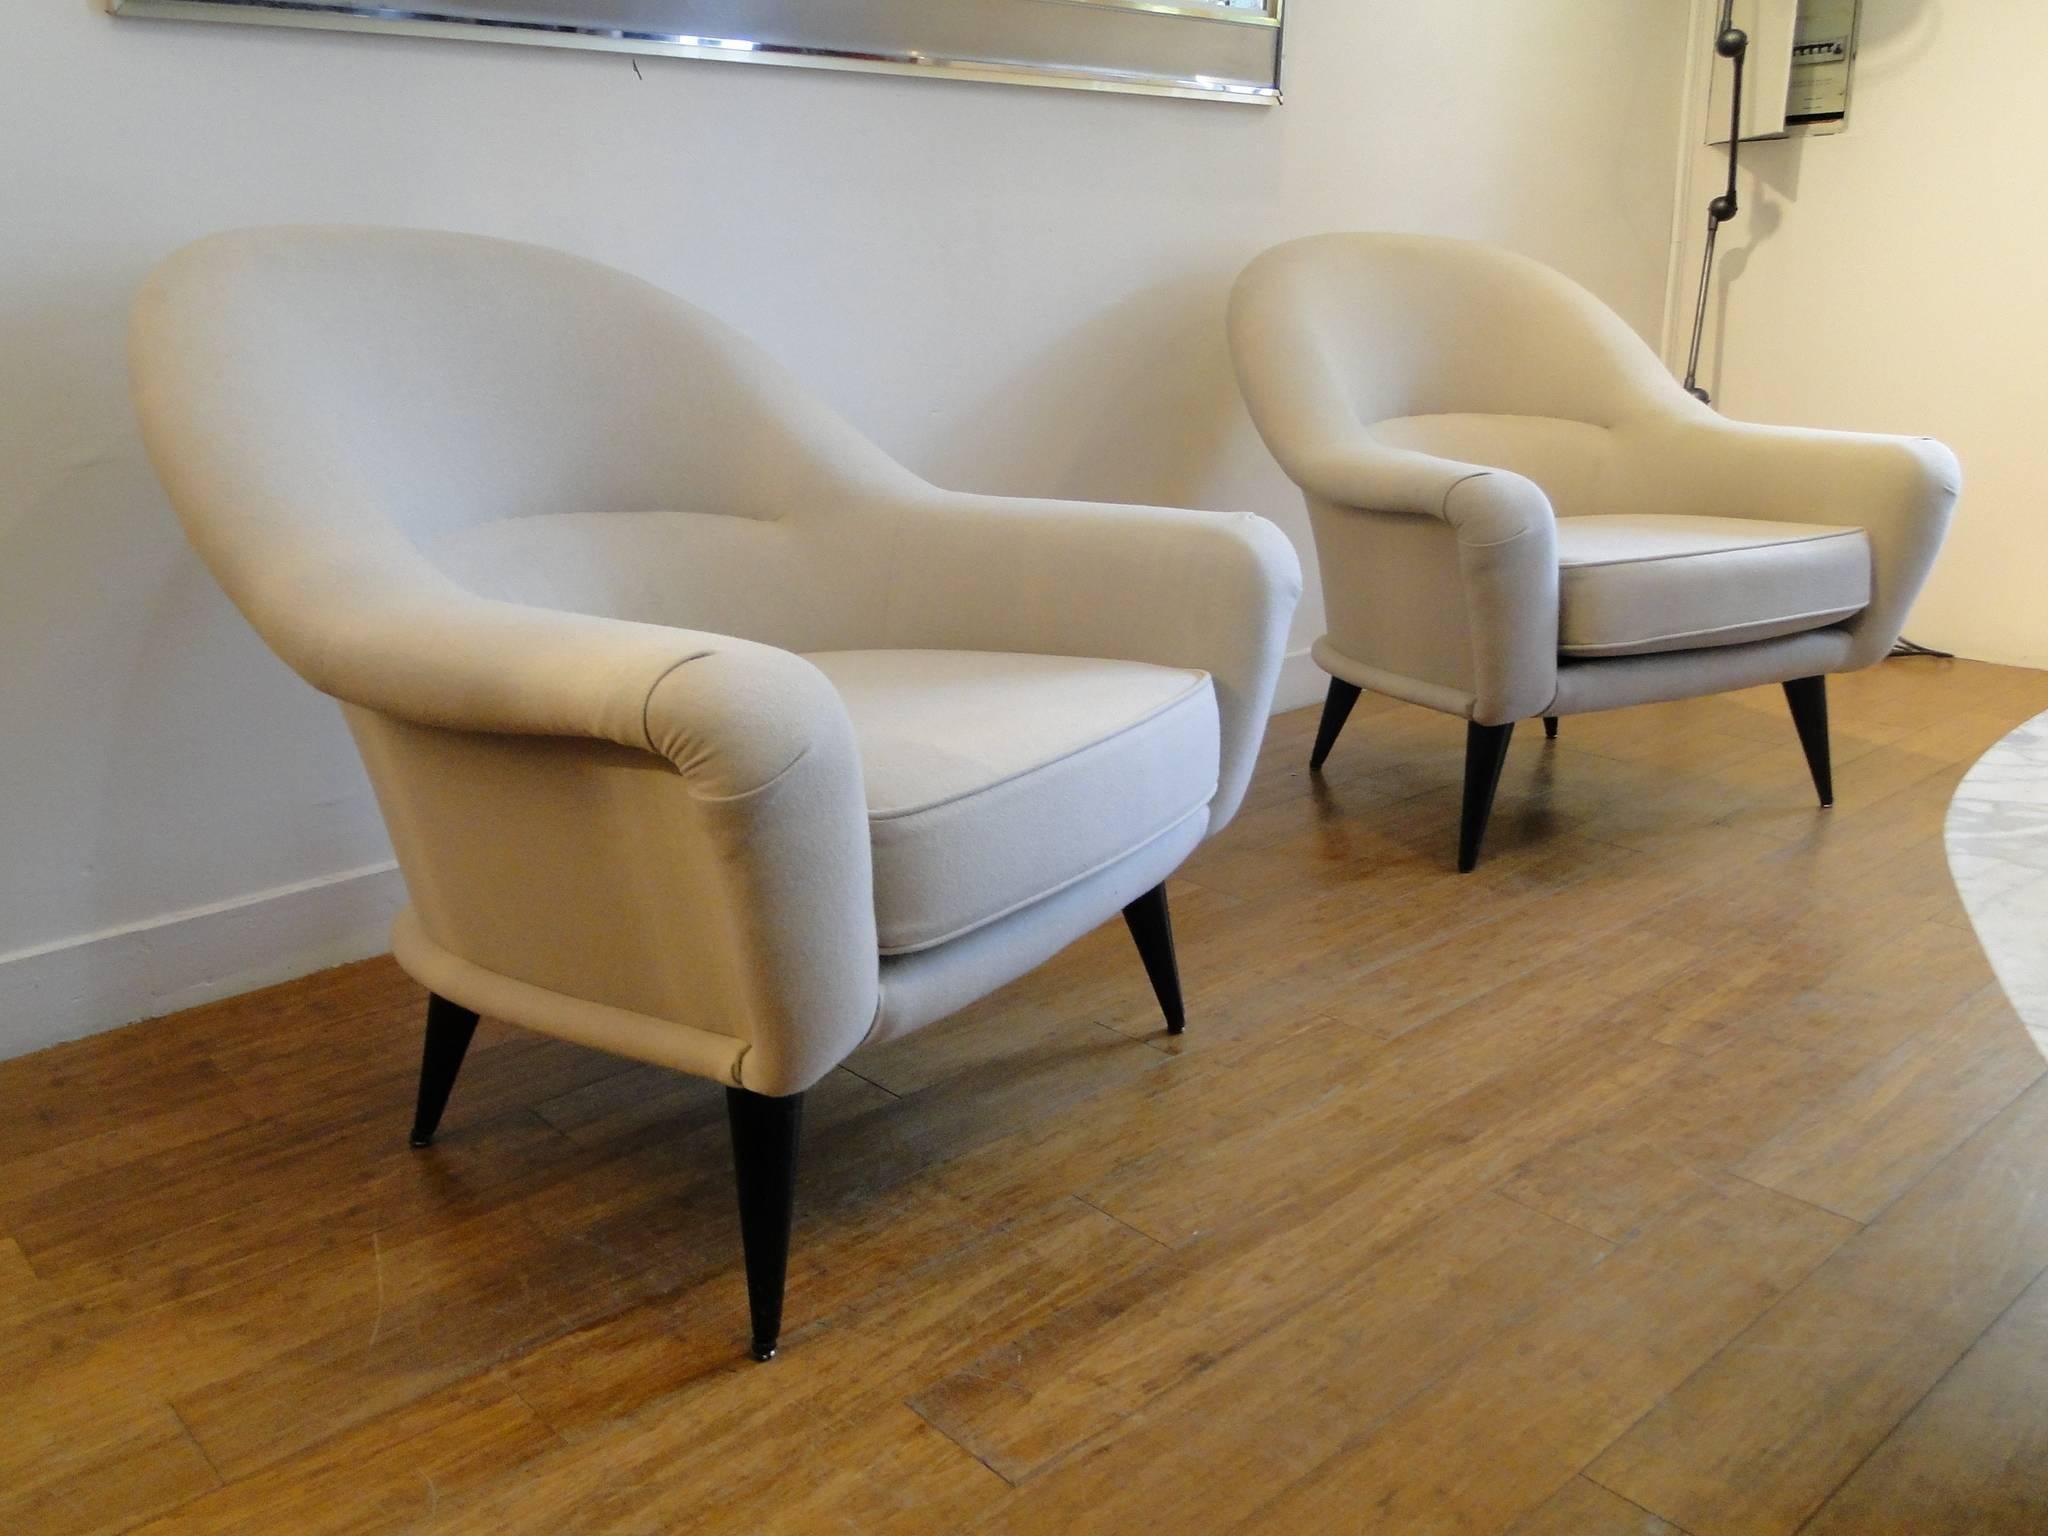 Pair of armchairs by Charles Ramos, 1955.